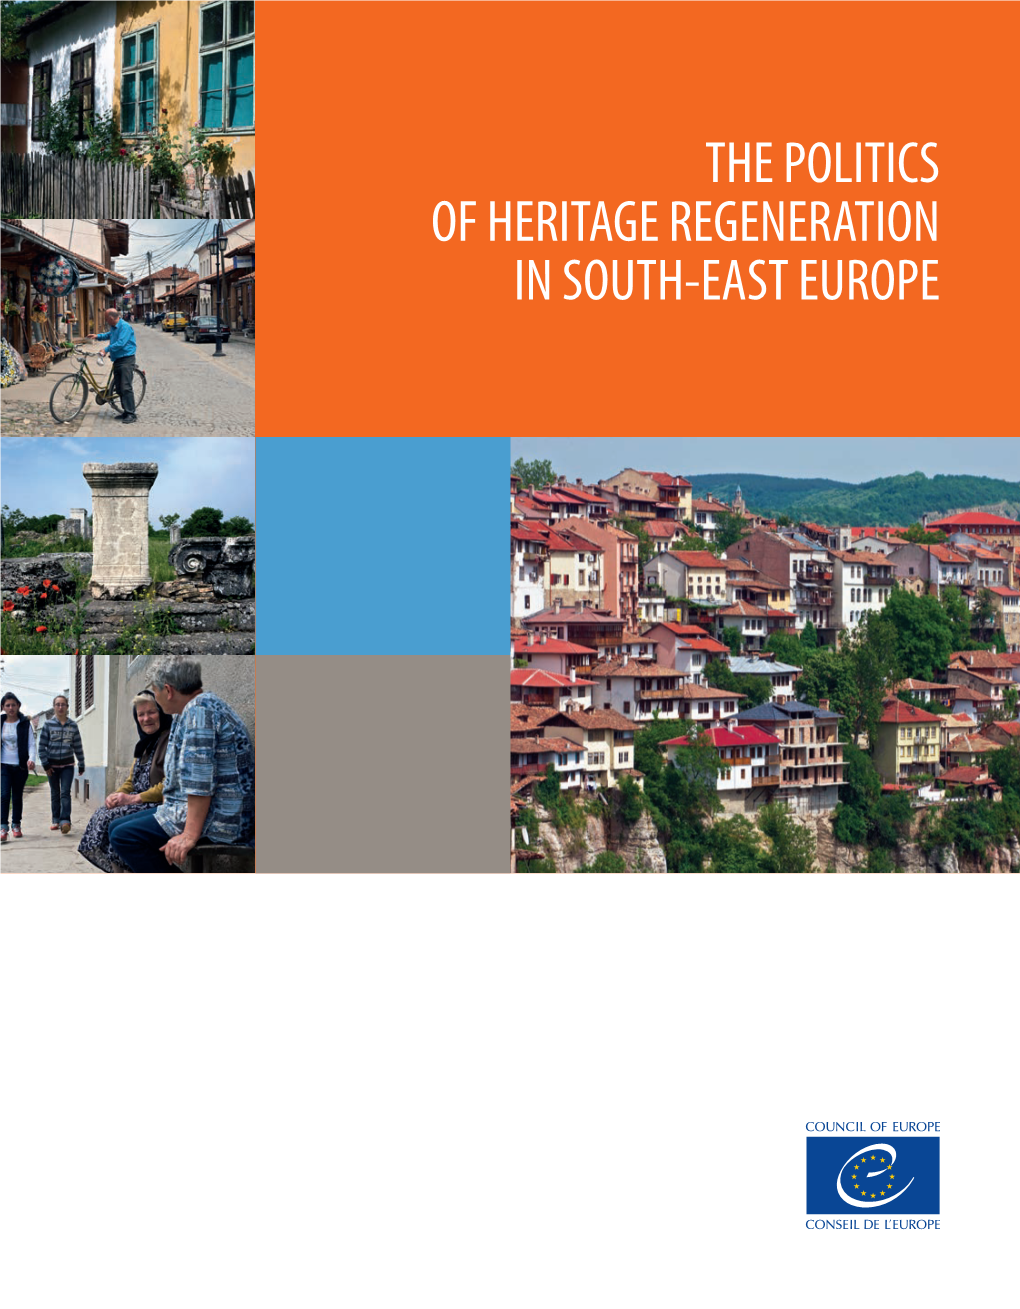 The Politics of Heritage Regeneration in South-East